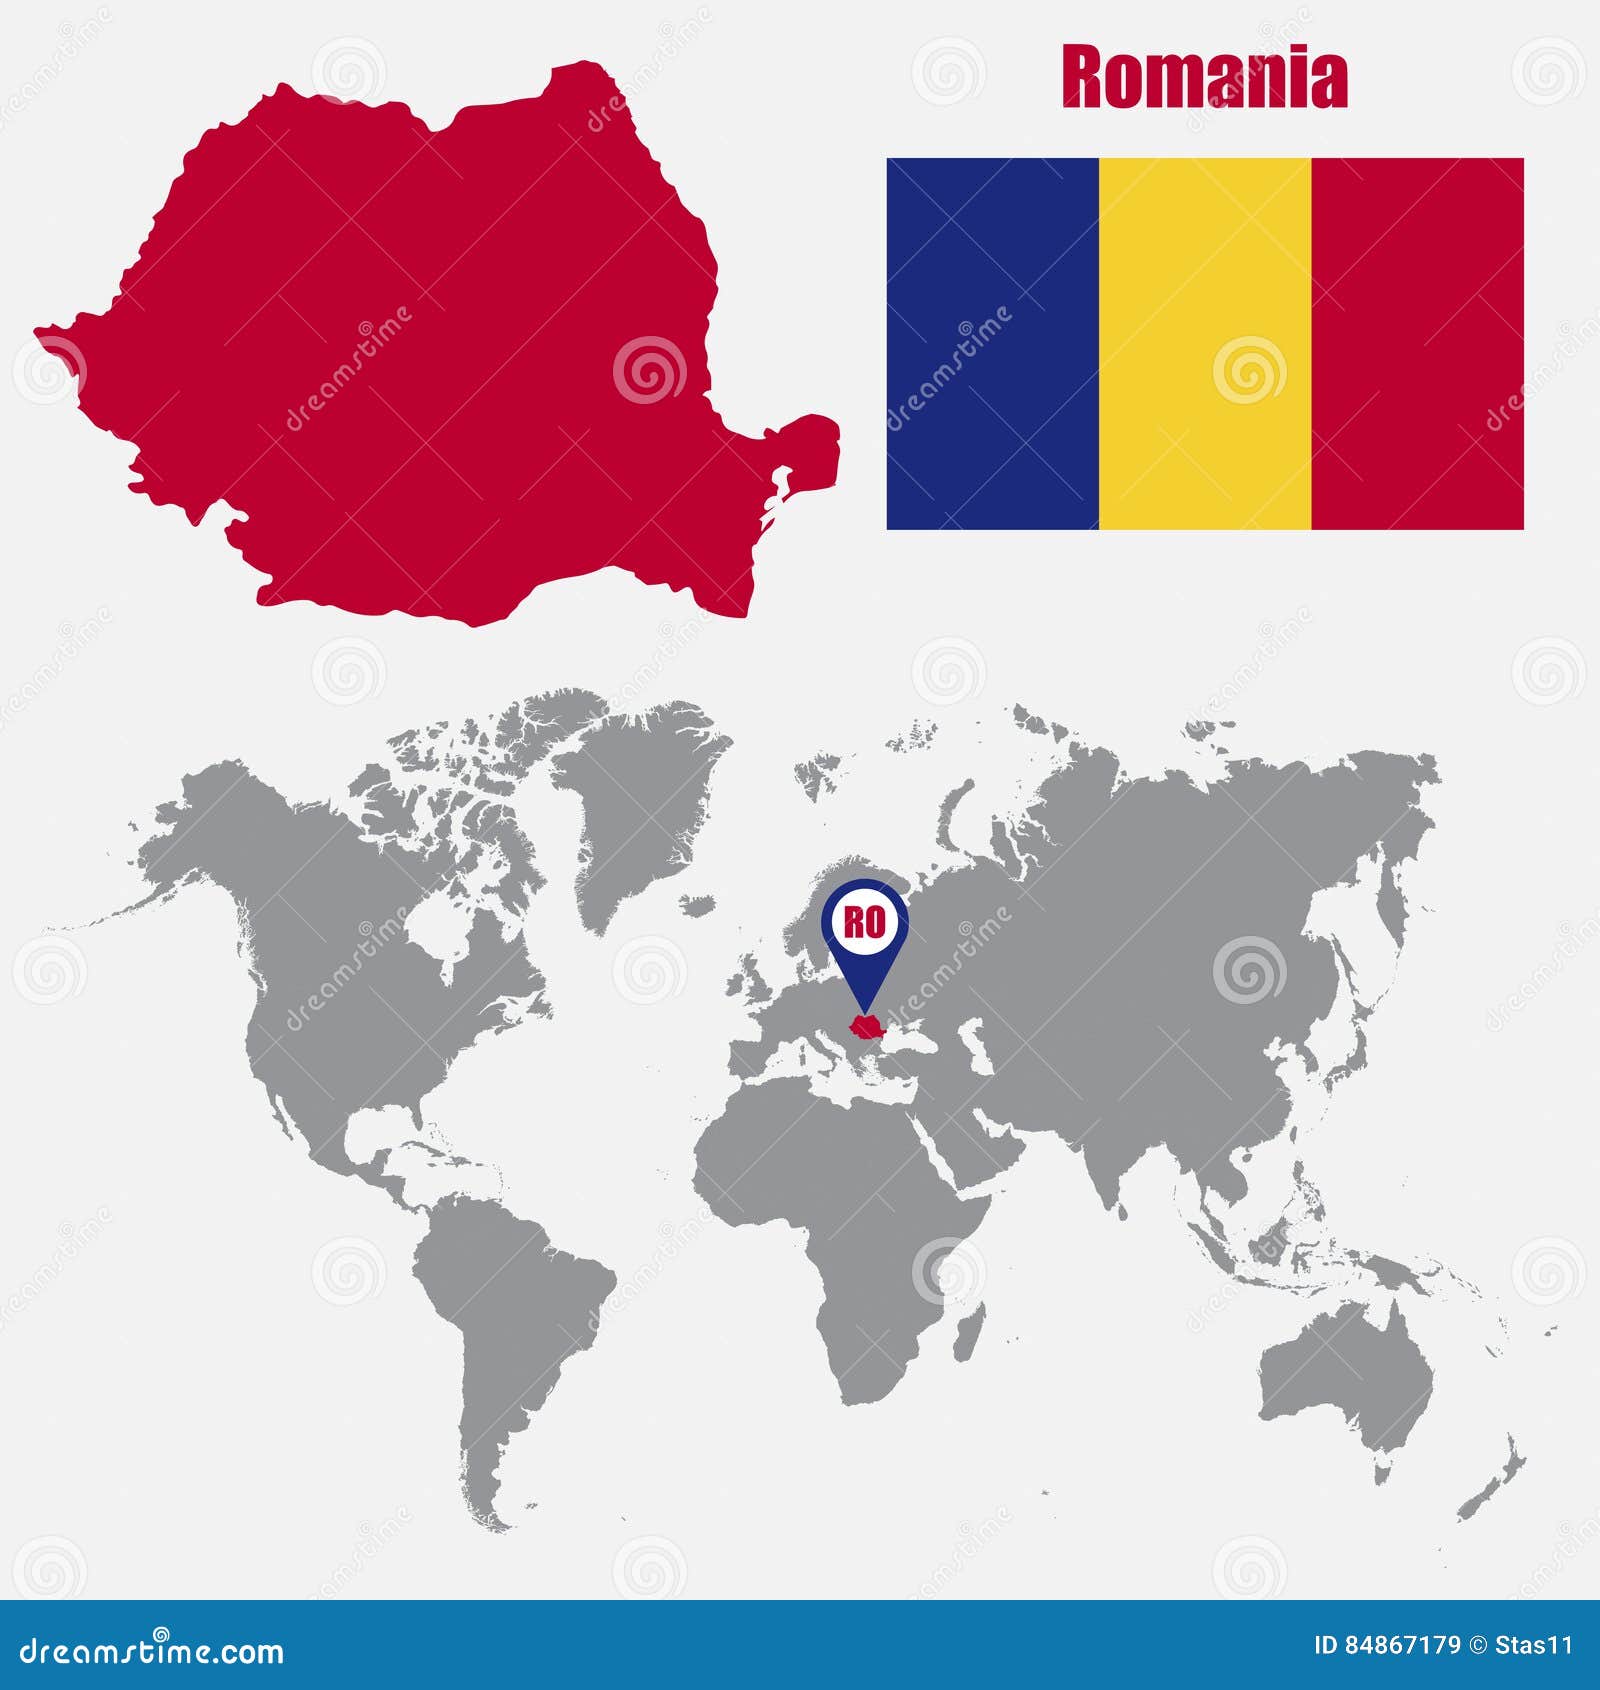 Where Is Romania Located On The World Map Map